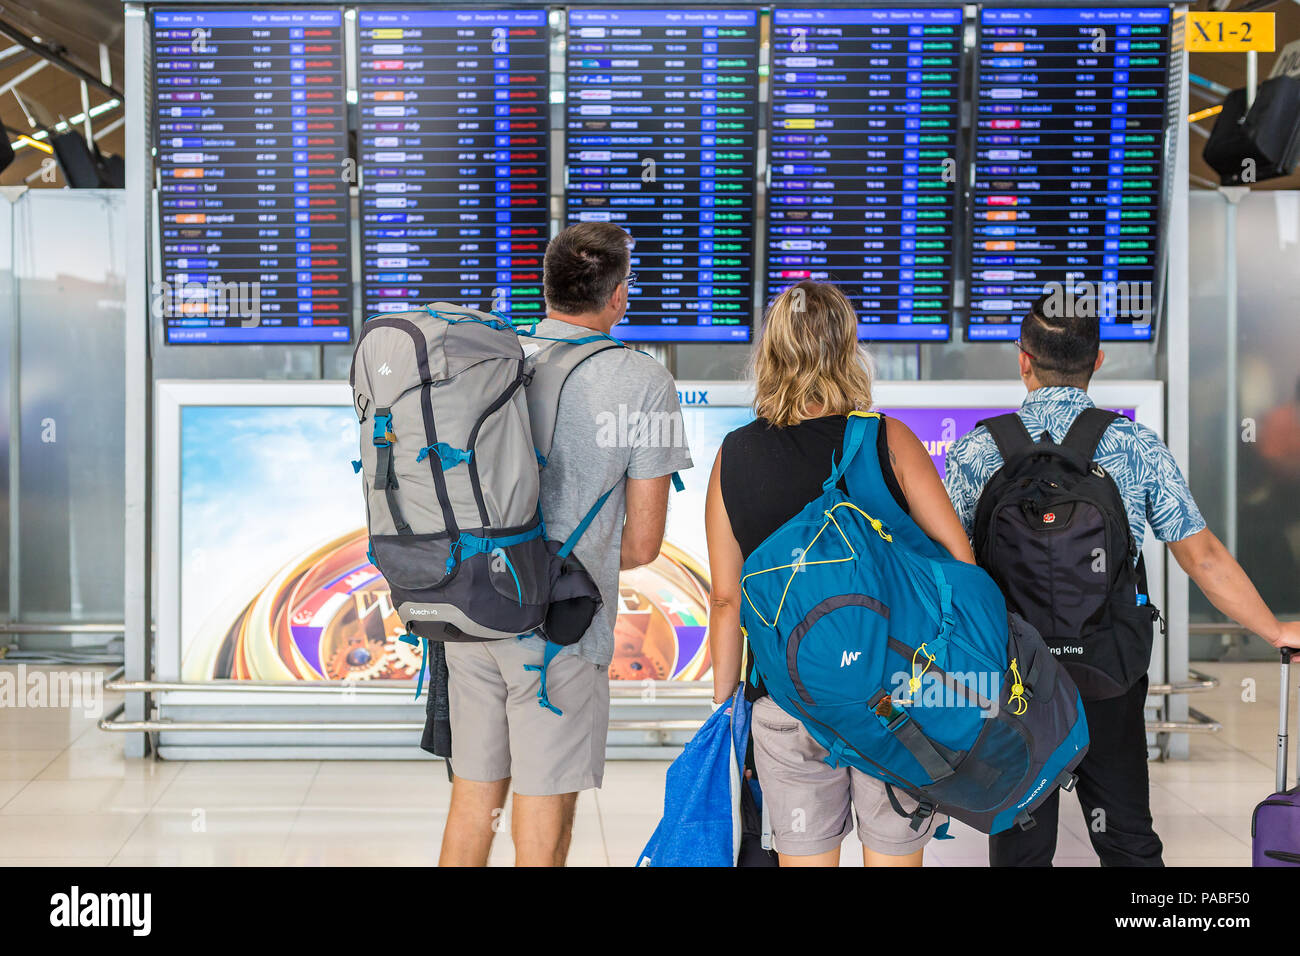 BANGKOK, THAILAND - 21 JULY 2018 - A group of tourists check out their flight schedules on digital display board at Suvarnaphomi International Airport Stock Photo